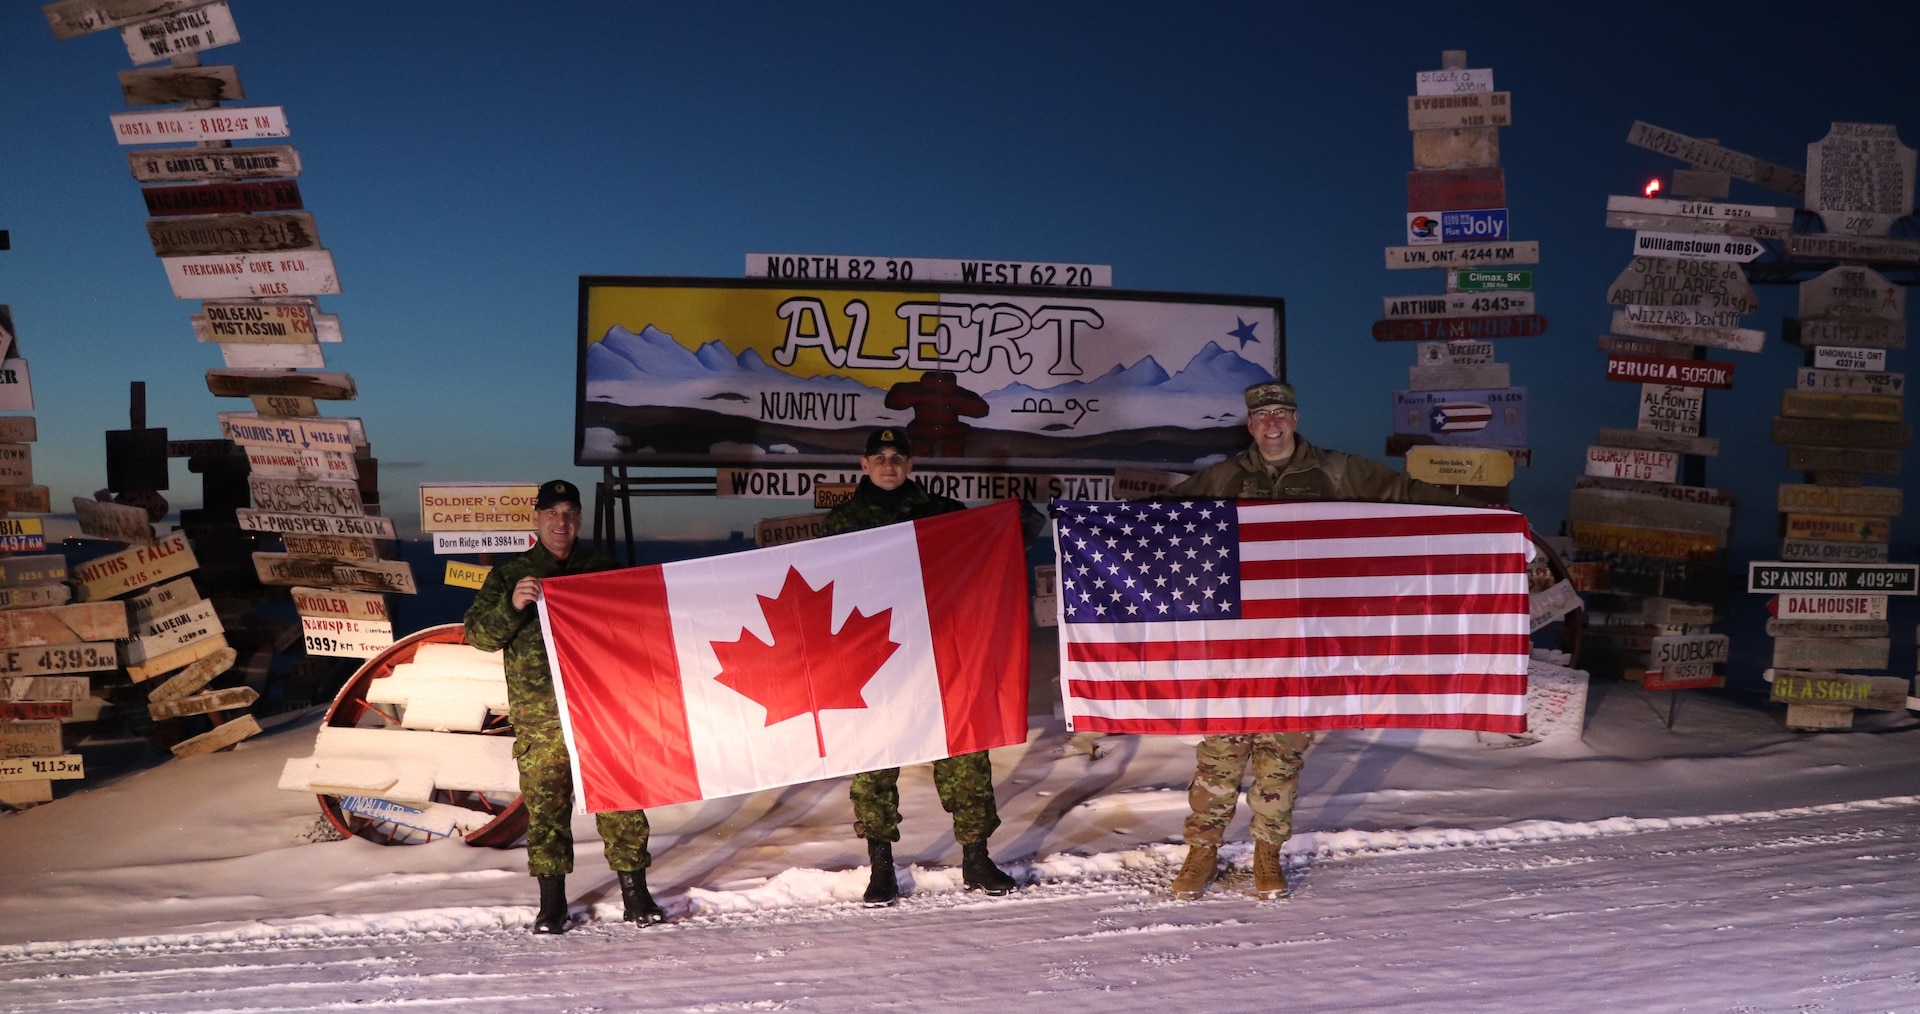 CANADIAN FORCES STATION ALERT, Canada – Col. Timothy Bos, right, 821st Air Base Group commander, Royal Canadian Air Force Maj. Loay El-Beltagy, center, acting commanding officer at Canadian Forces Station Alert; and RCAF Master Warrant Officer Dwayne Fox, left, pose for a photo Oct. 30, 2019 at CFS Alert.  The relationship between the two military bases goes back to 1956 when Operation BOXTOP began to enable the transport of critical resources to the northernmost inhabited place in the world. (U.S. Air Force courtesy photo)